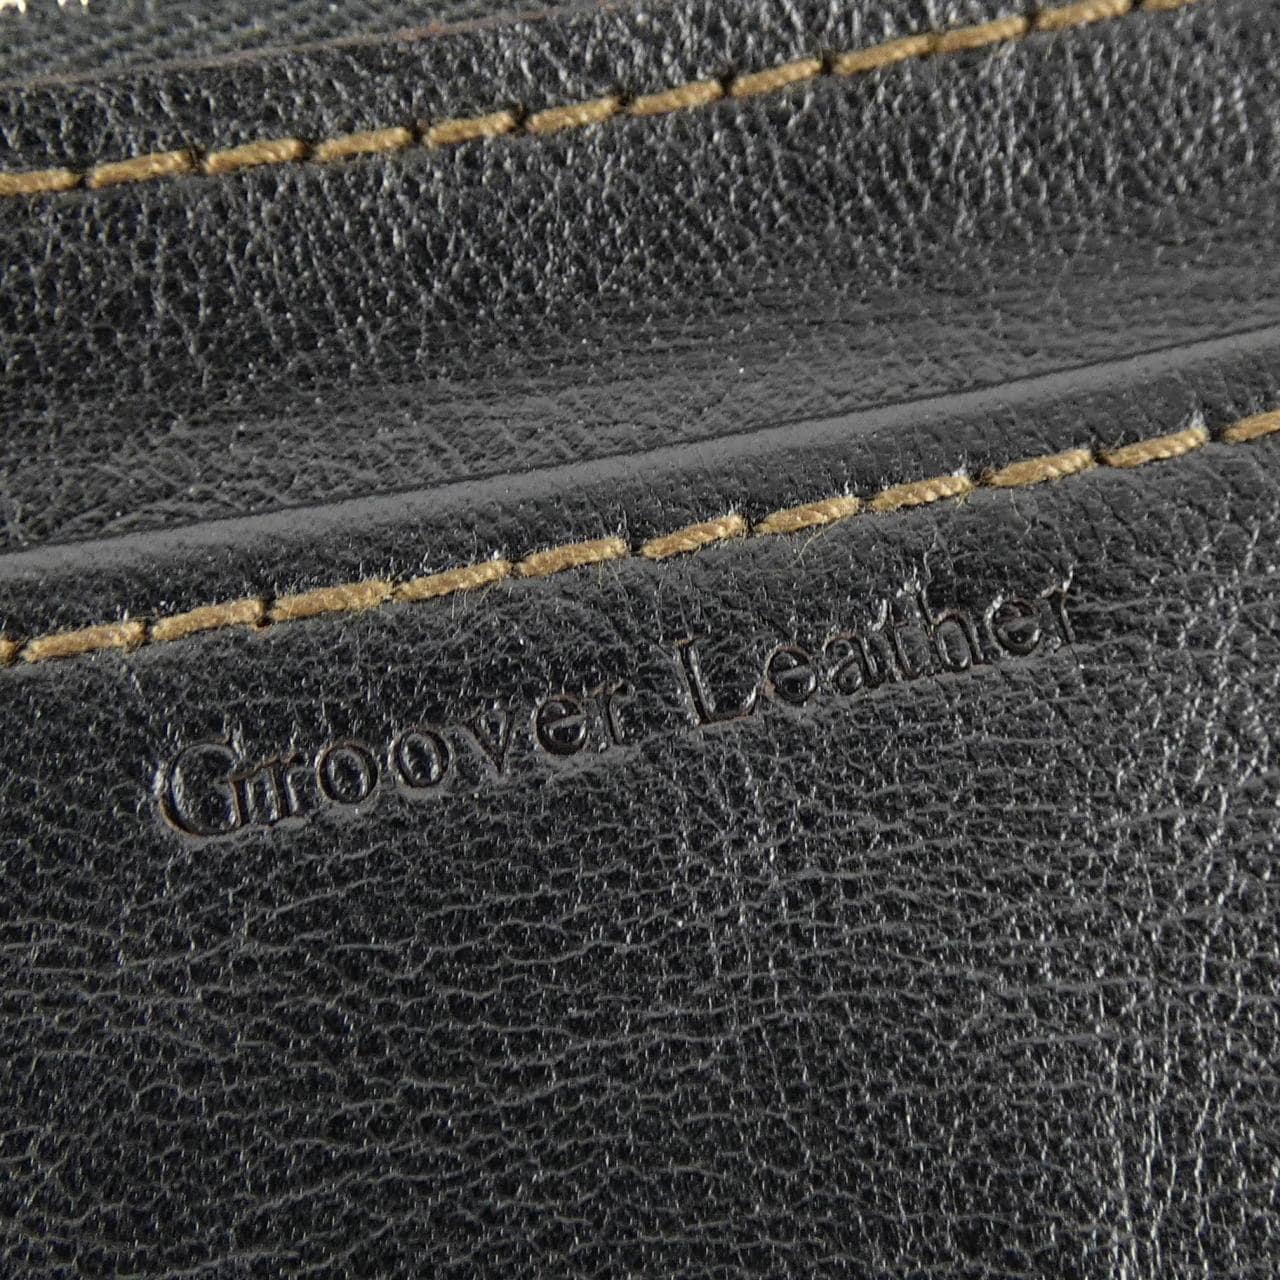 Groover Leather WALLET